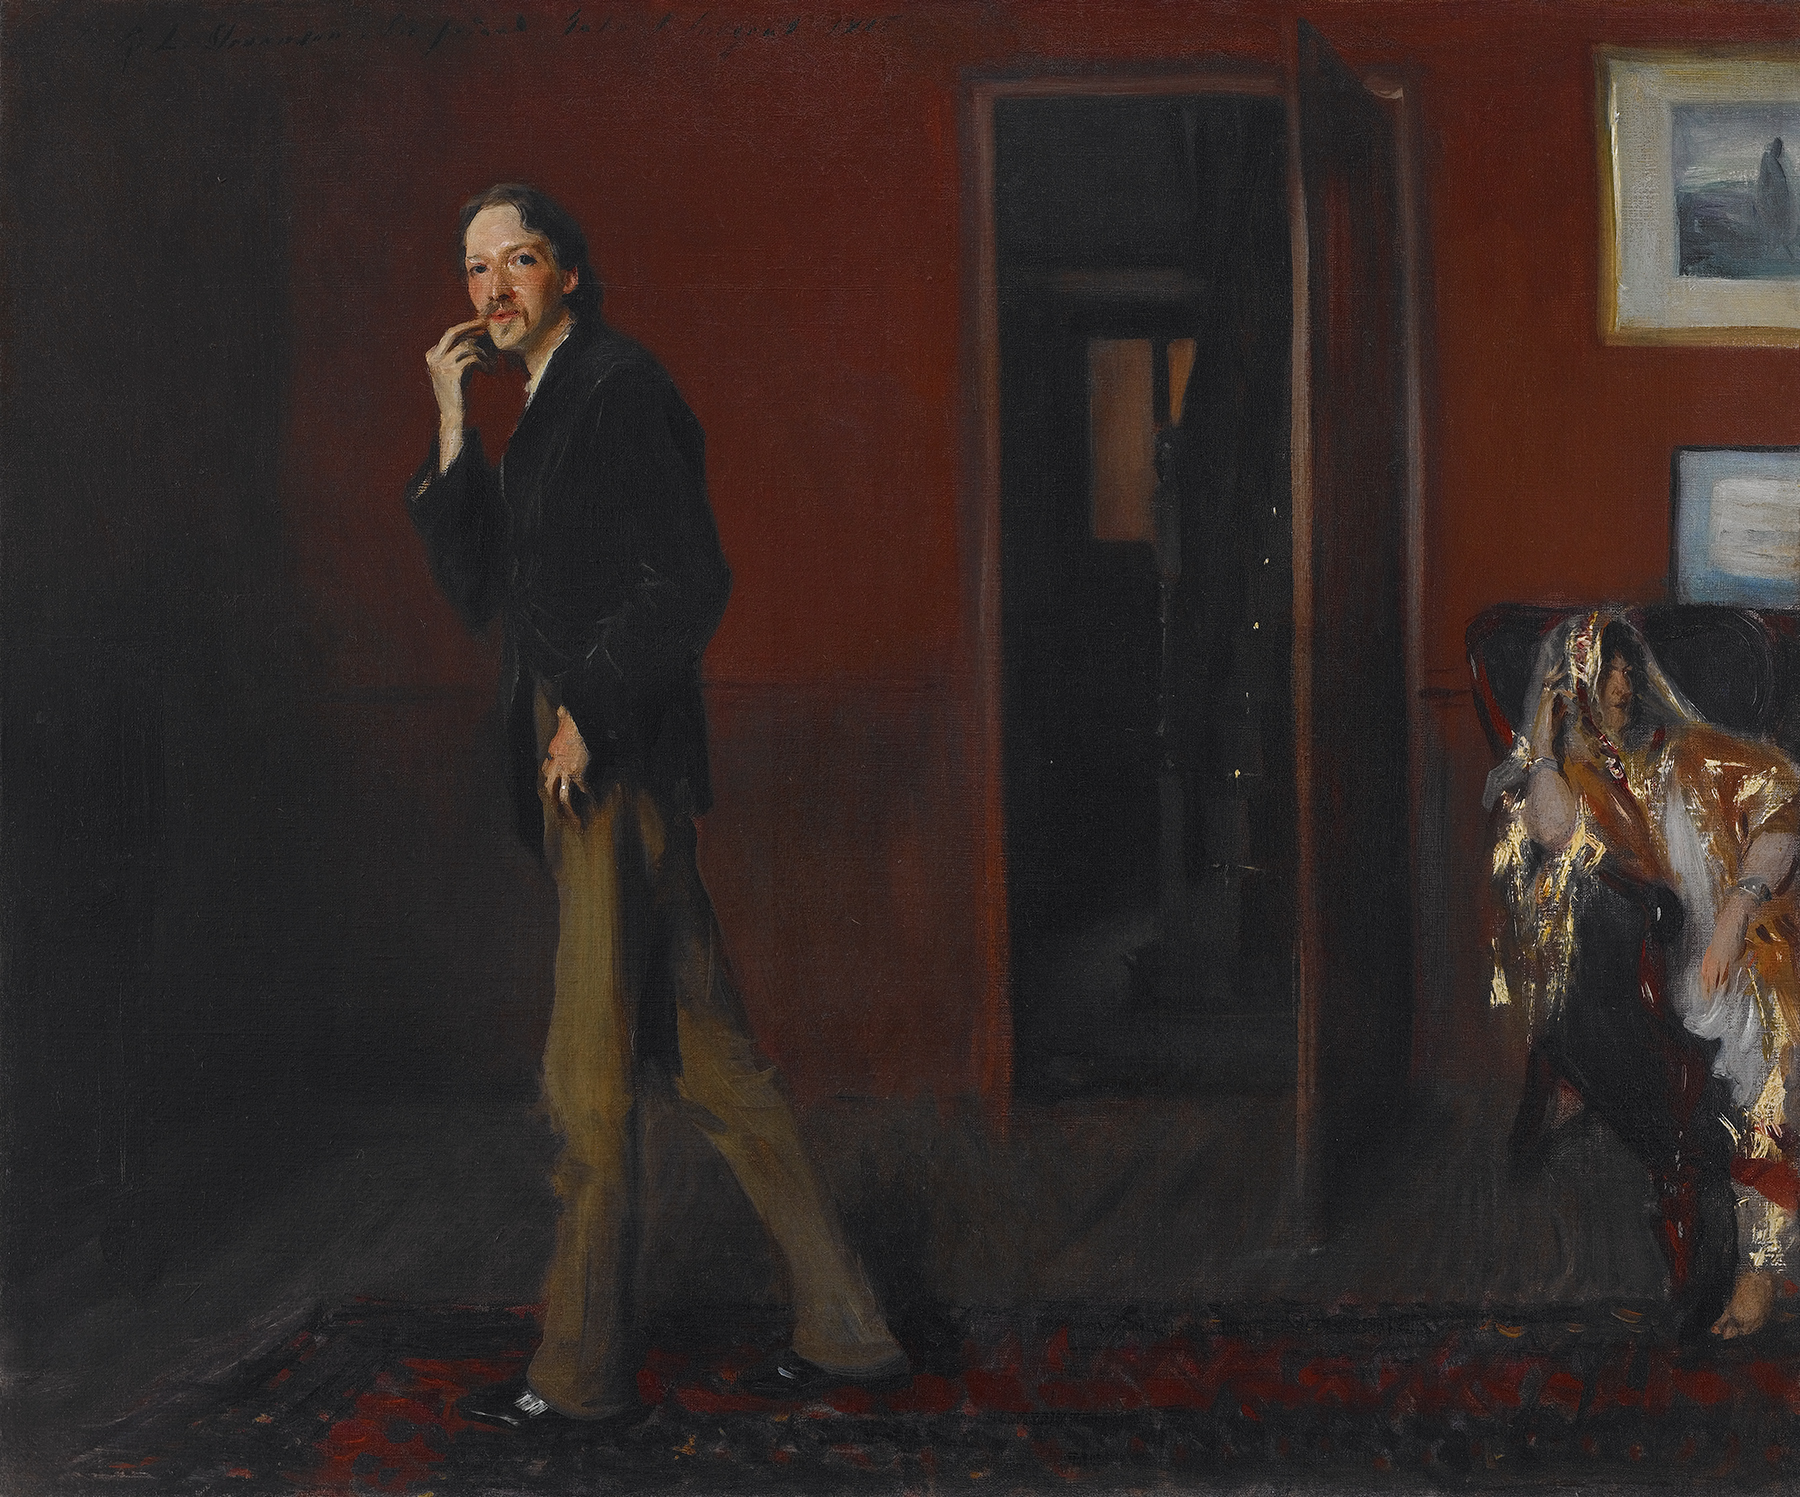 Oil painting of a man walking across a red-painted room, his head turned toward the viewer and one hand touching his moustache. To the right is a woman in a decorative robe lounging on a sofa.